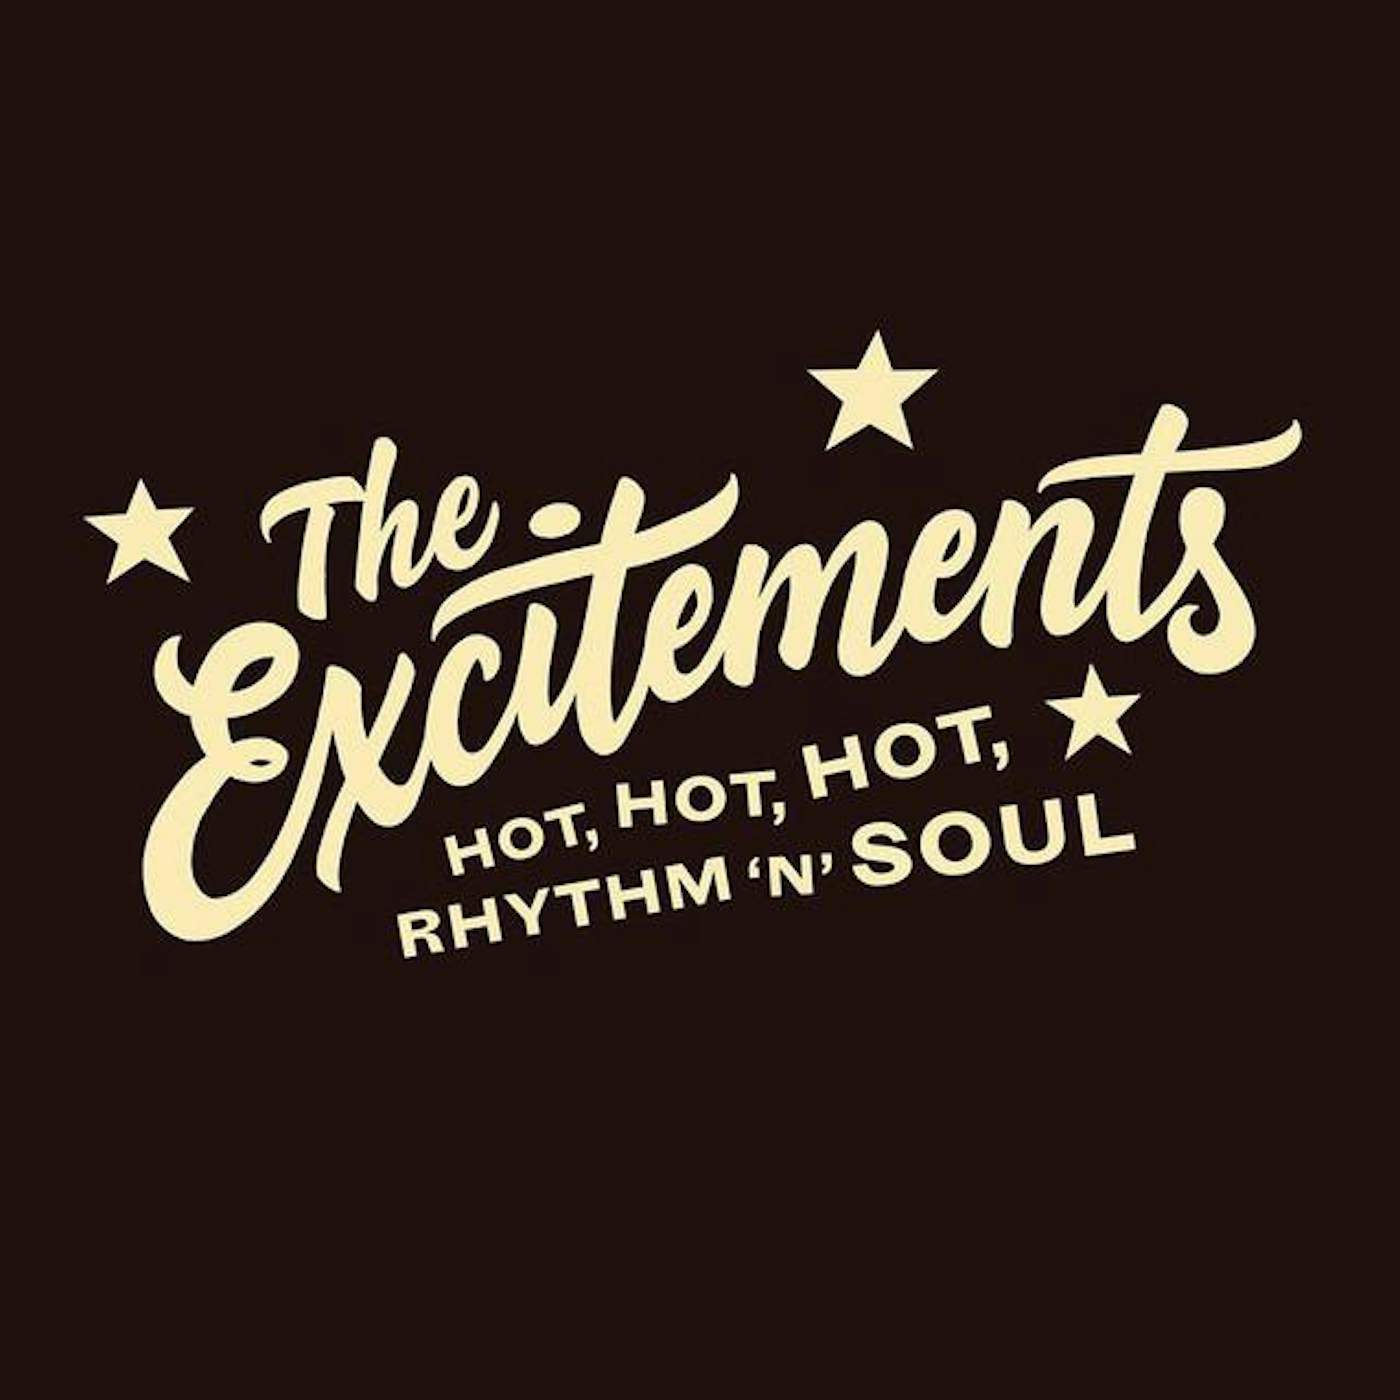 The Excitements